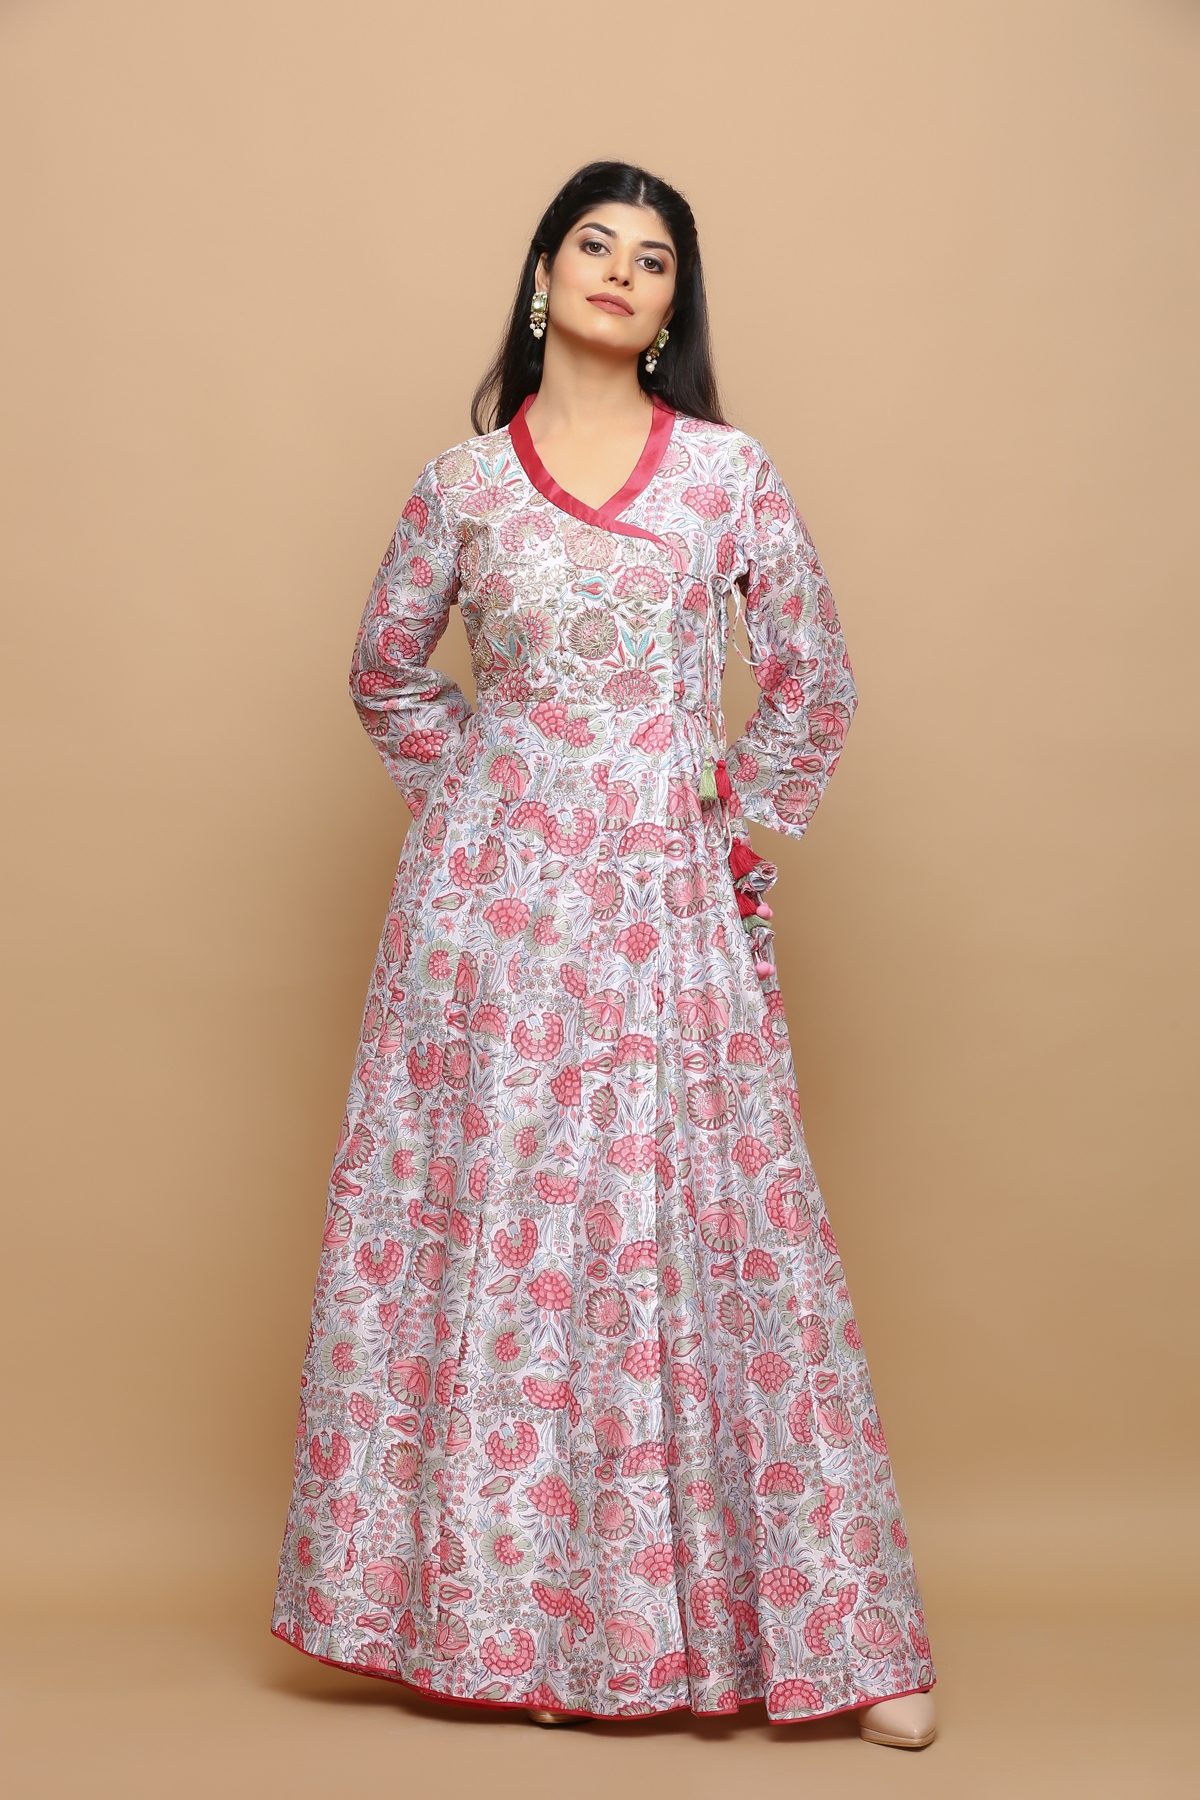 White block printed jaal chanderi angrakha anarkali kurta with handwork on the yoke and tassels on the side and is fully lined .